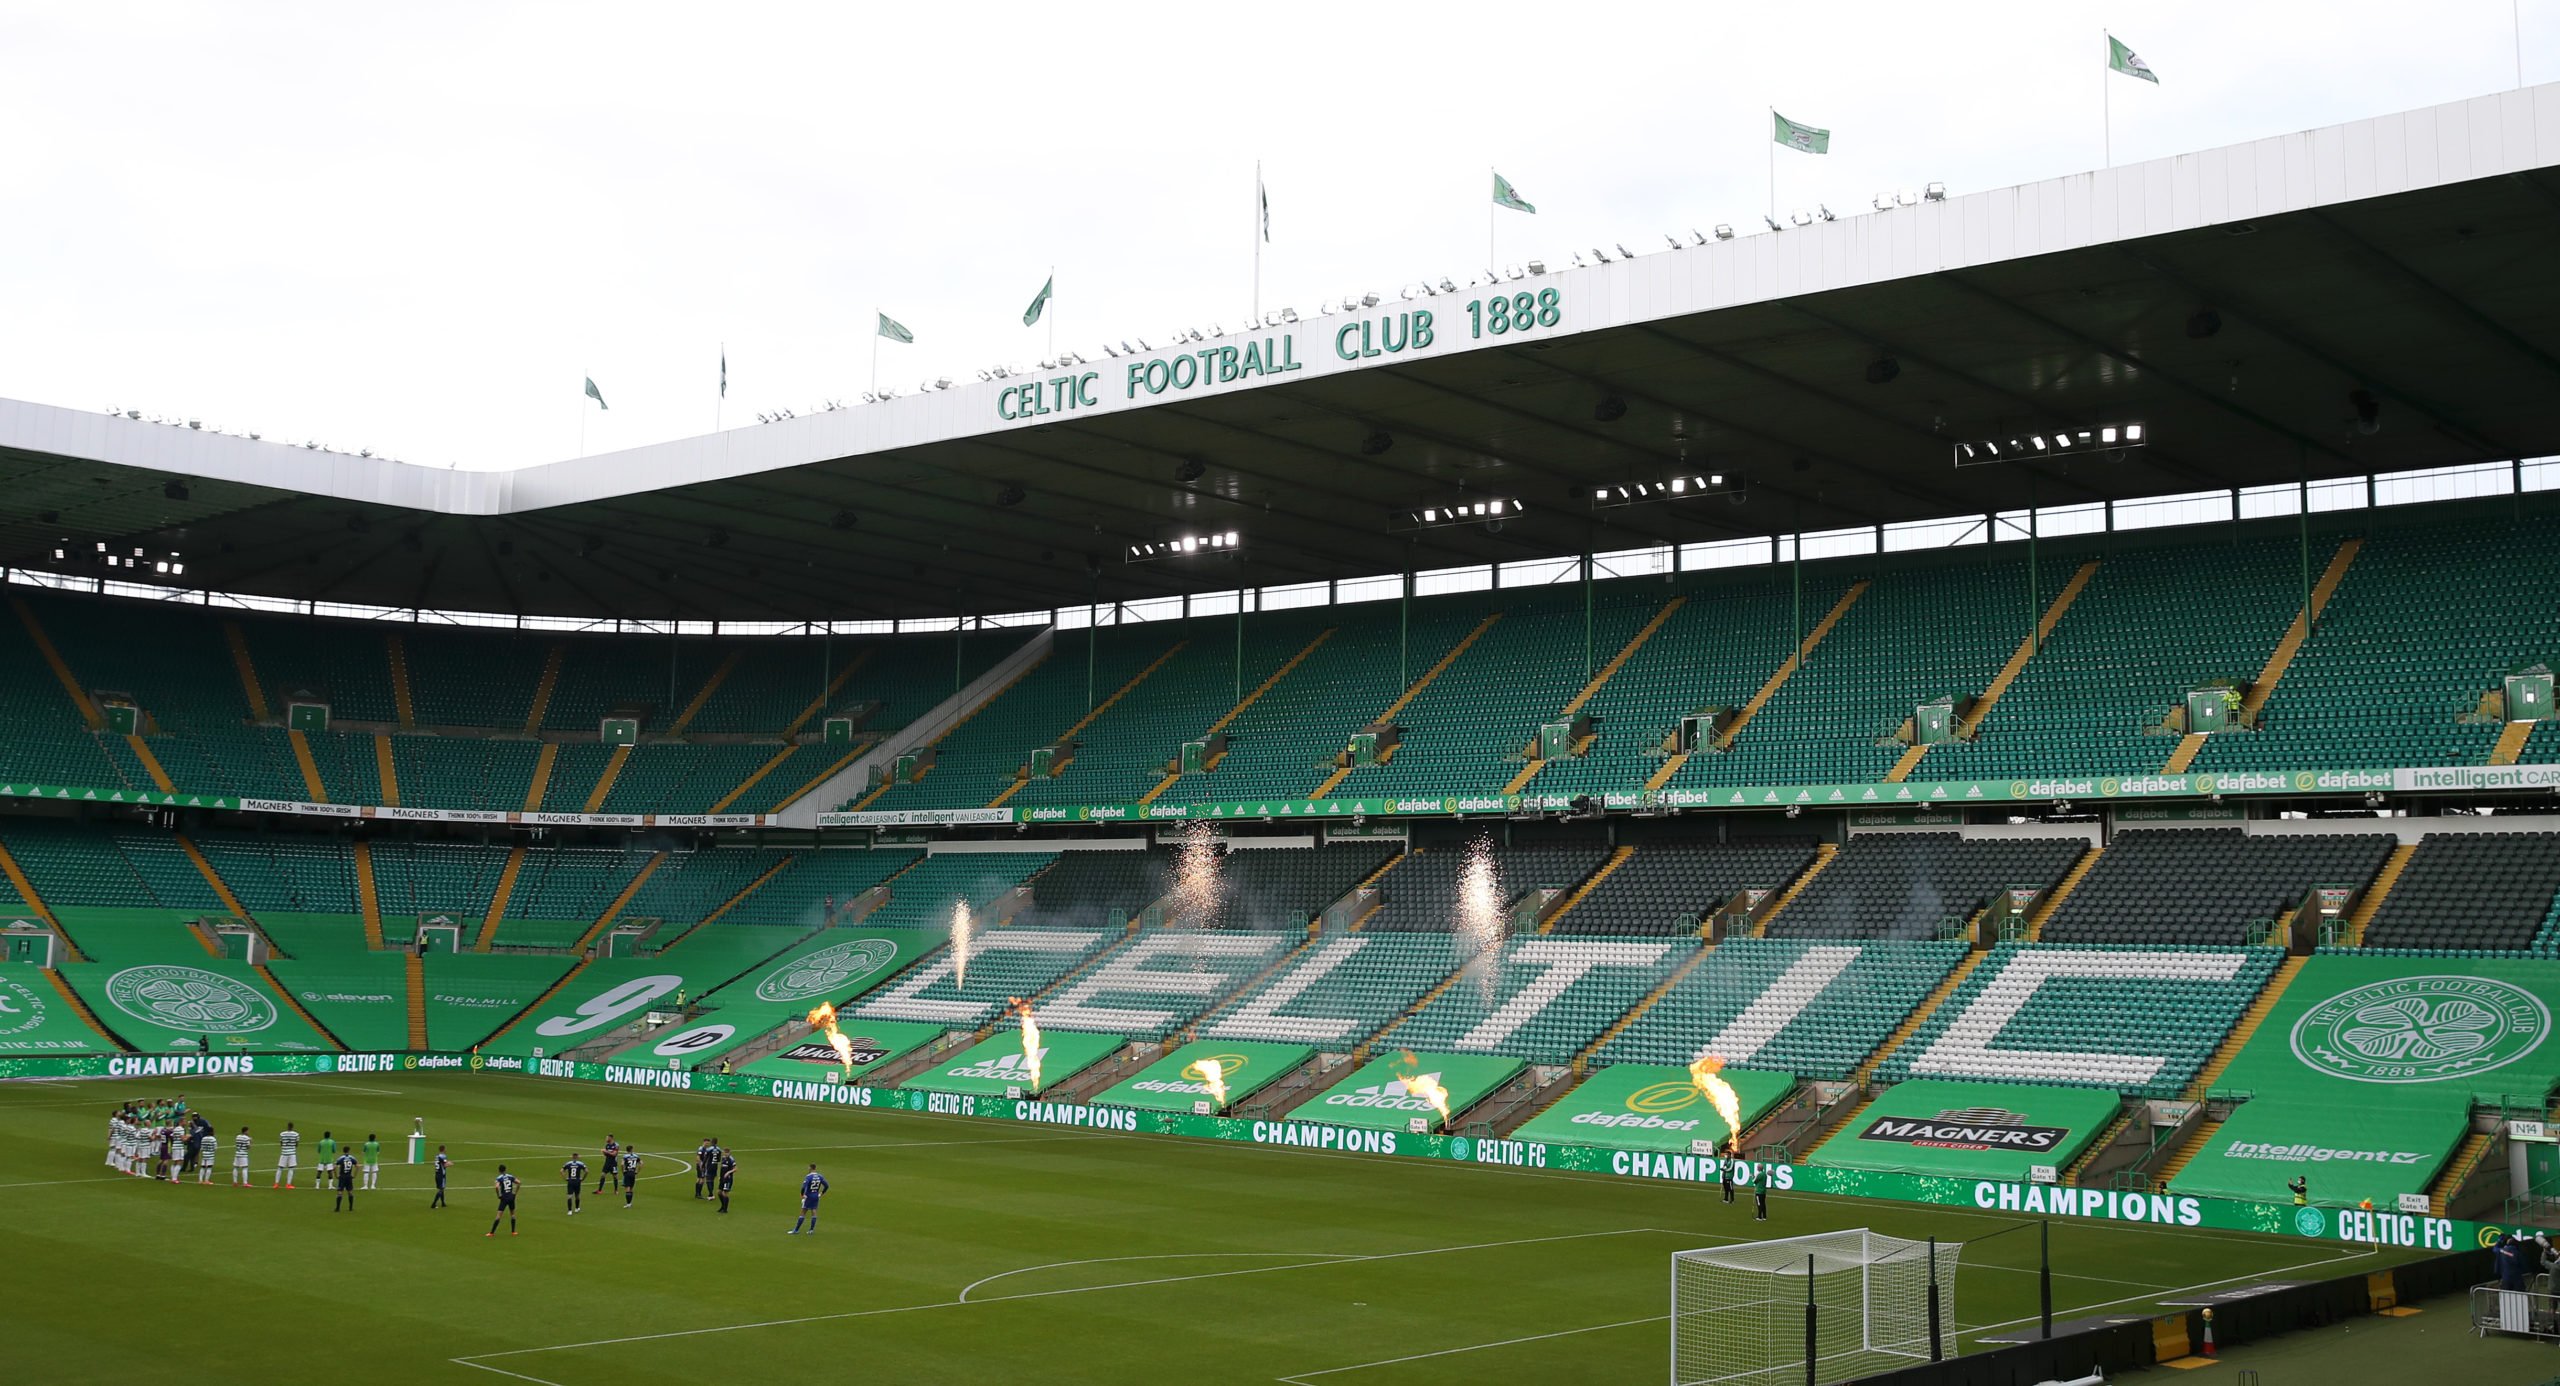 Celtic Park will welcome fans back one day